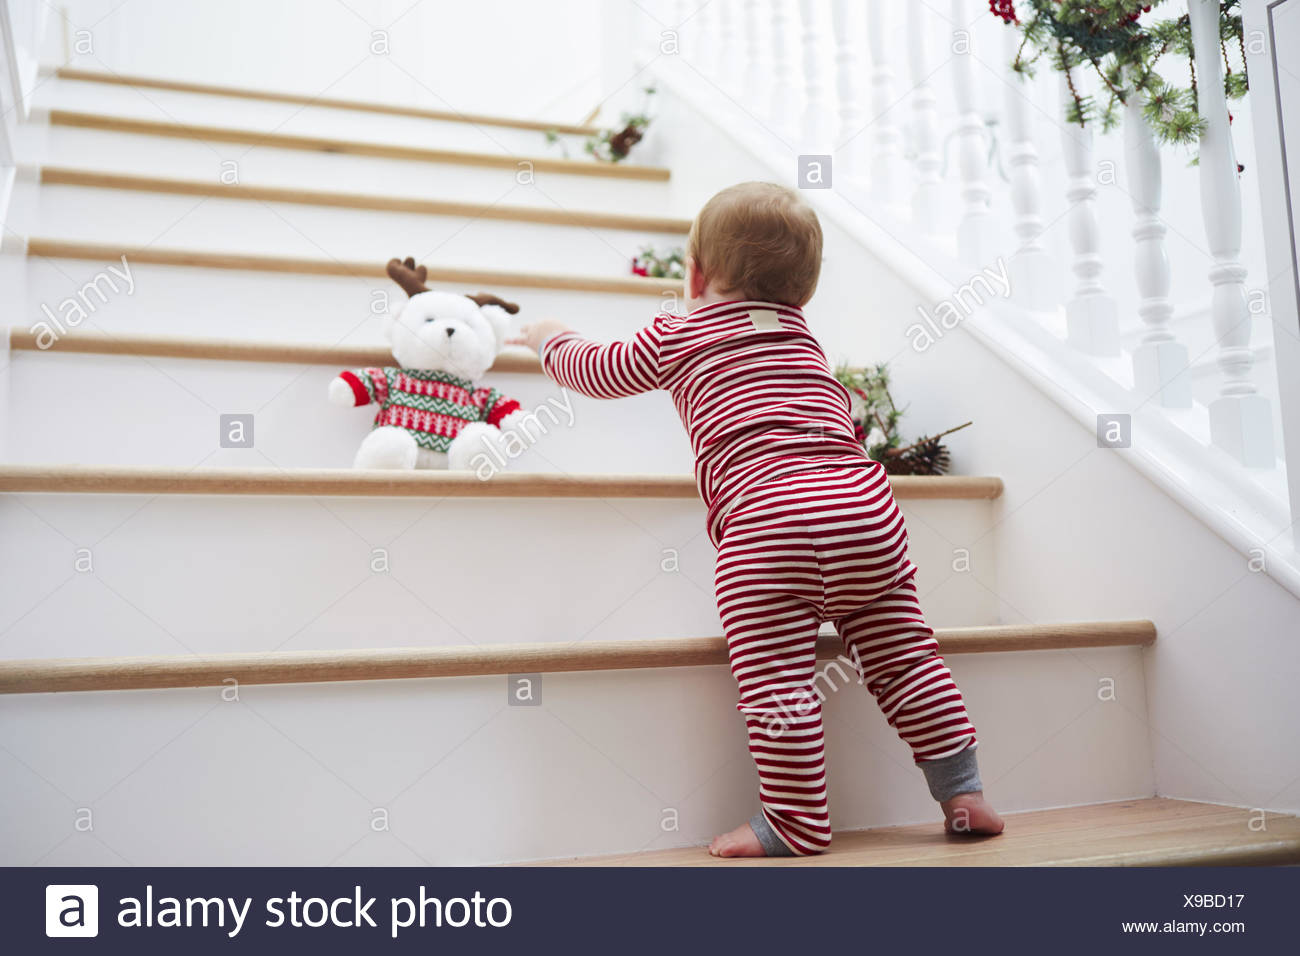 when can a baby climb stairs